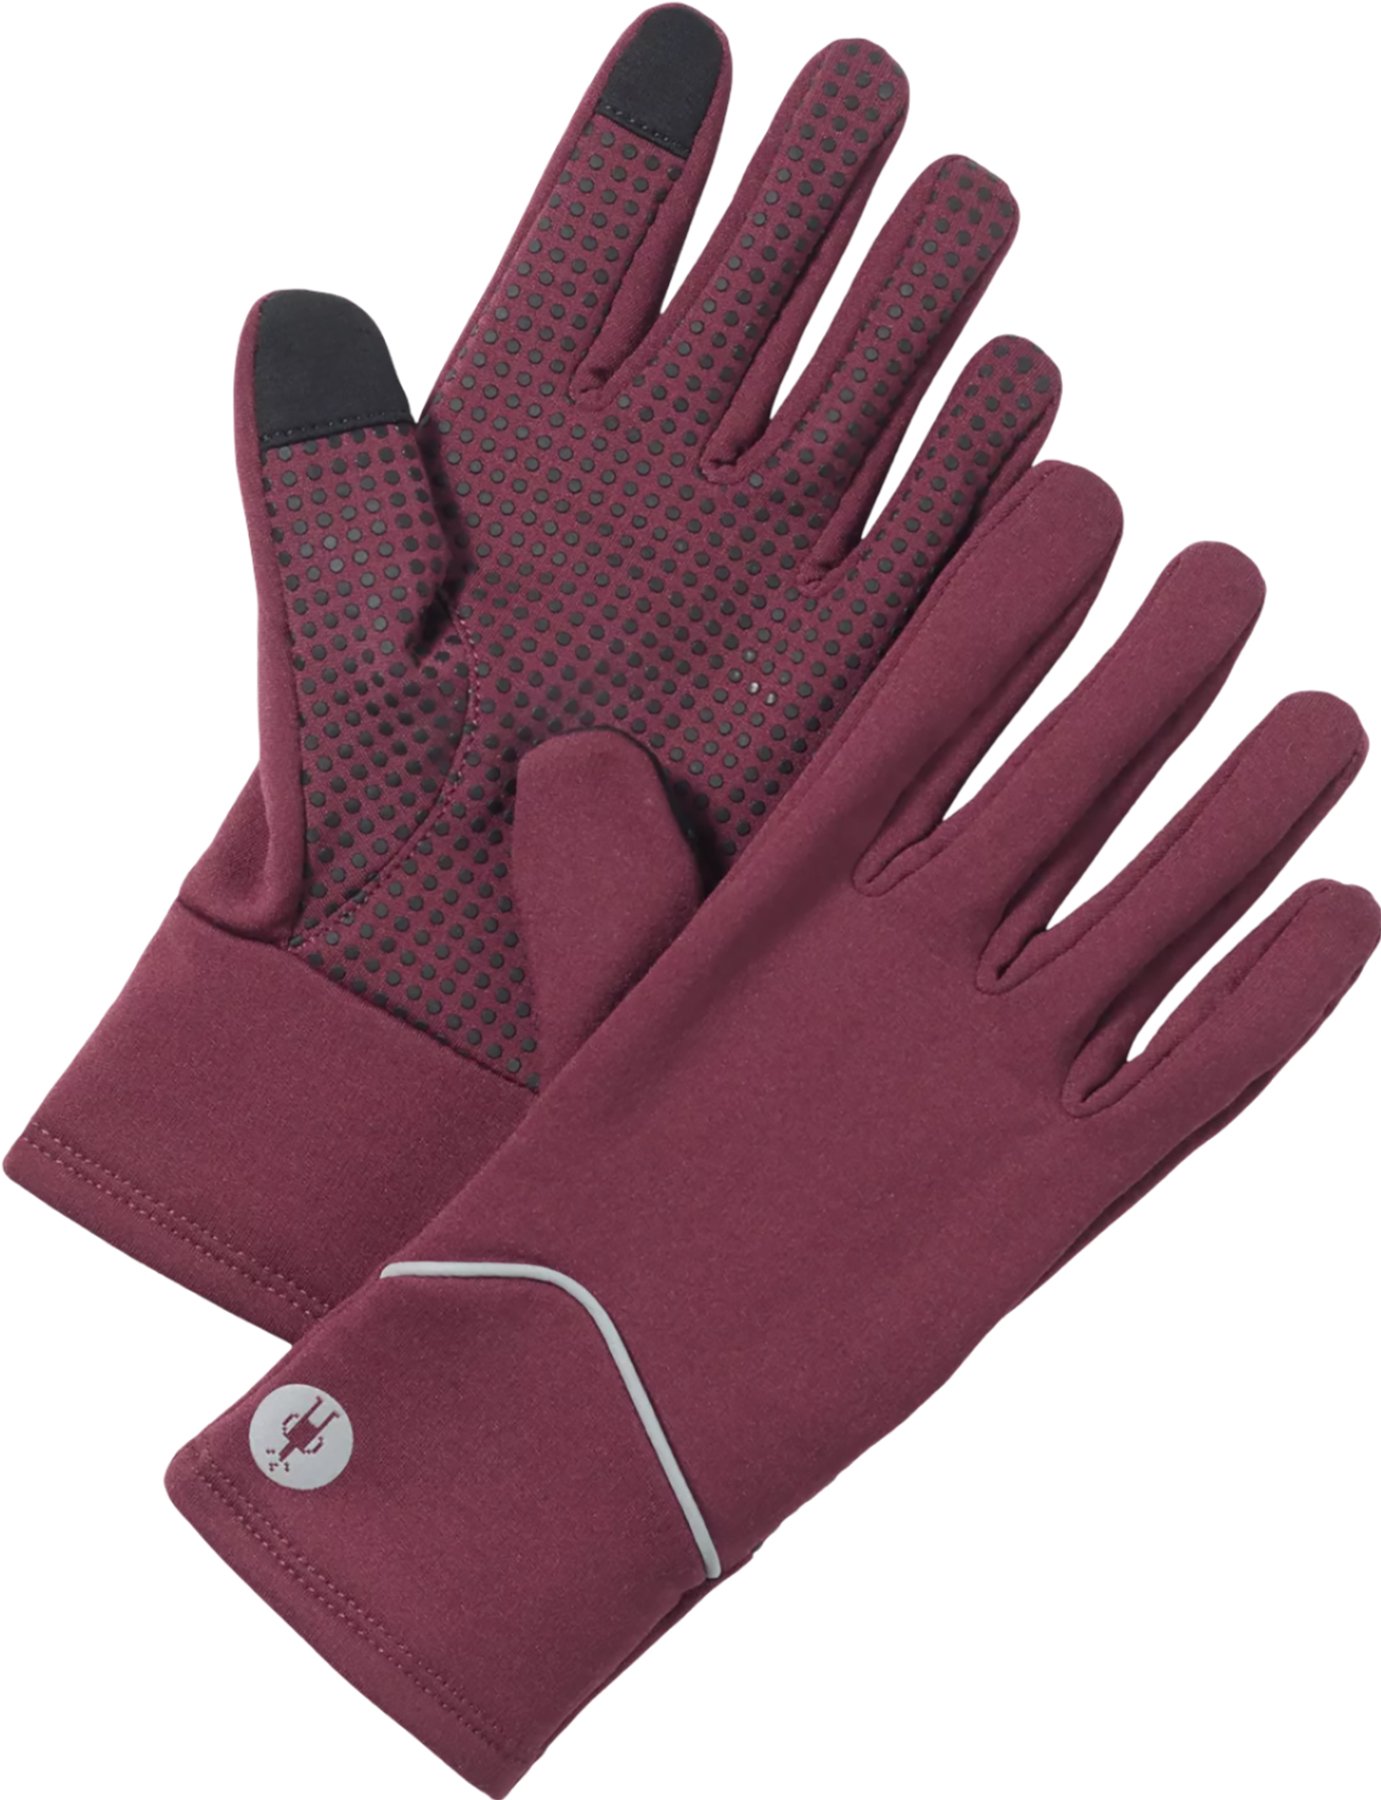 Women's Hunting Gloves & Accessories